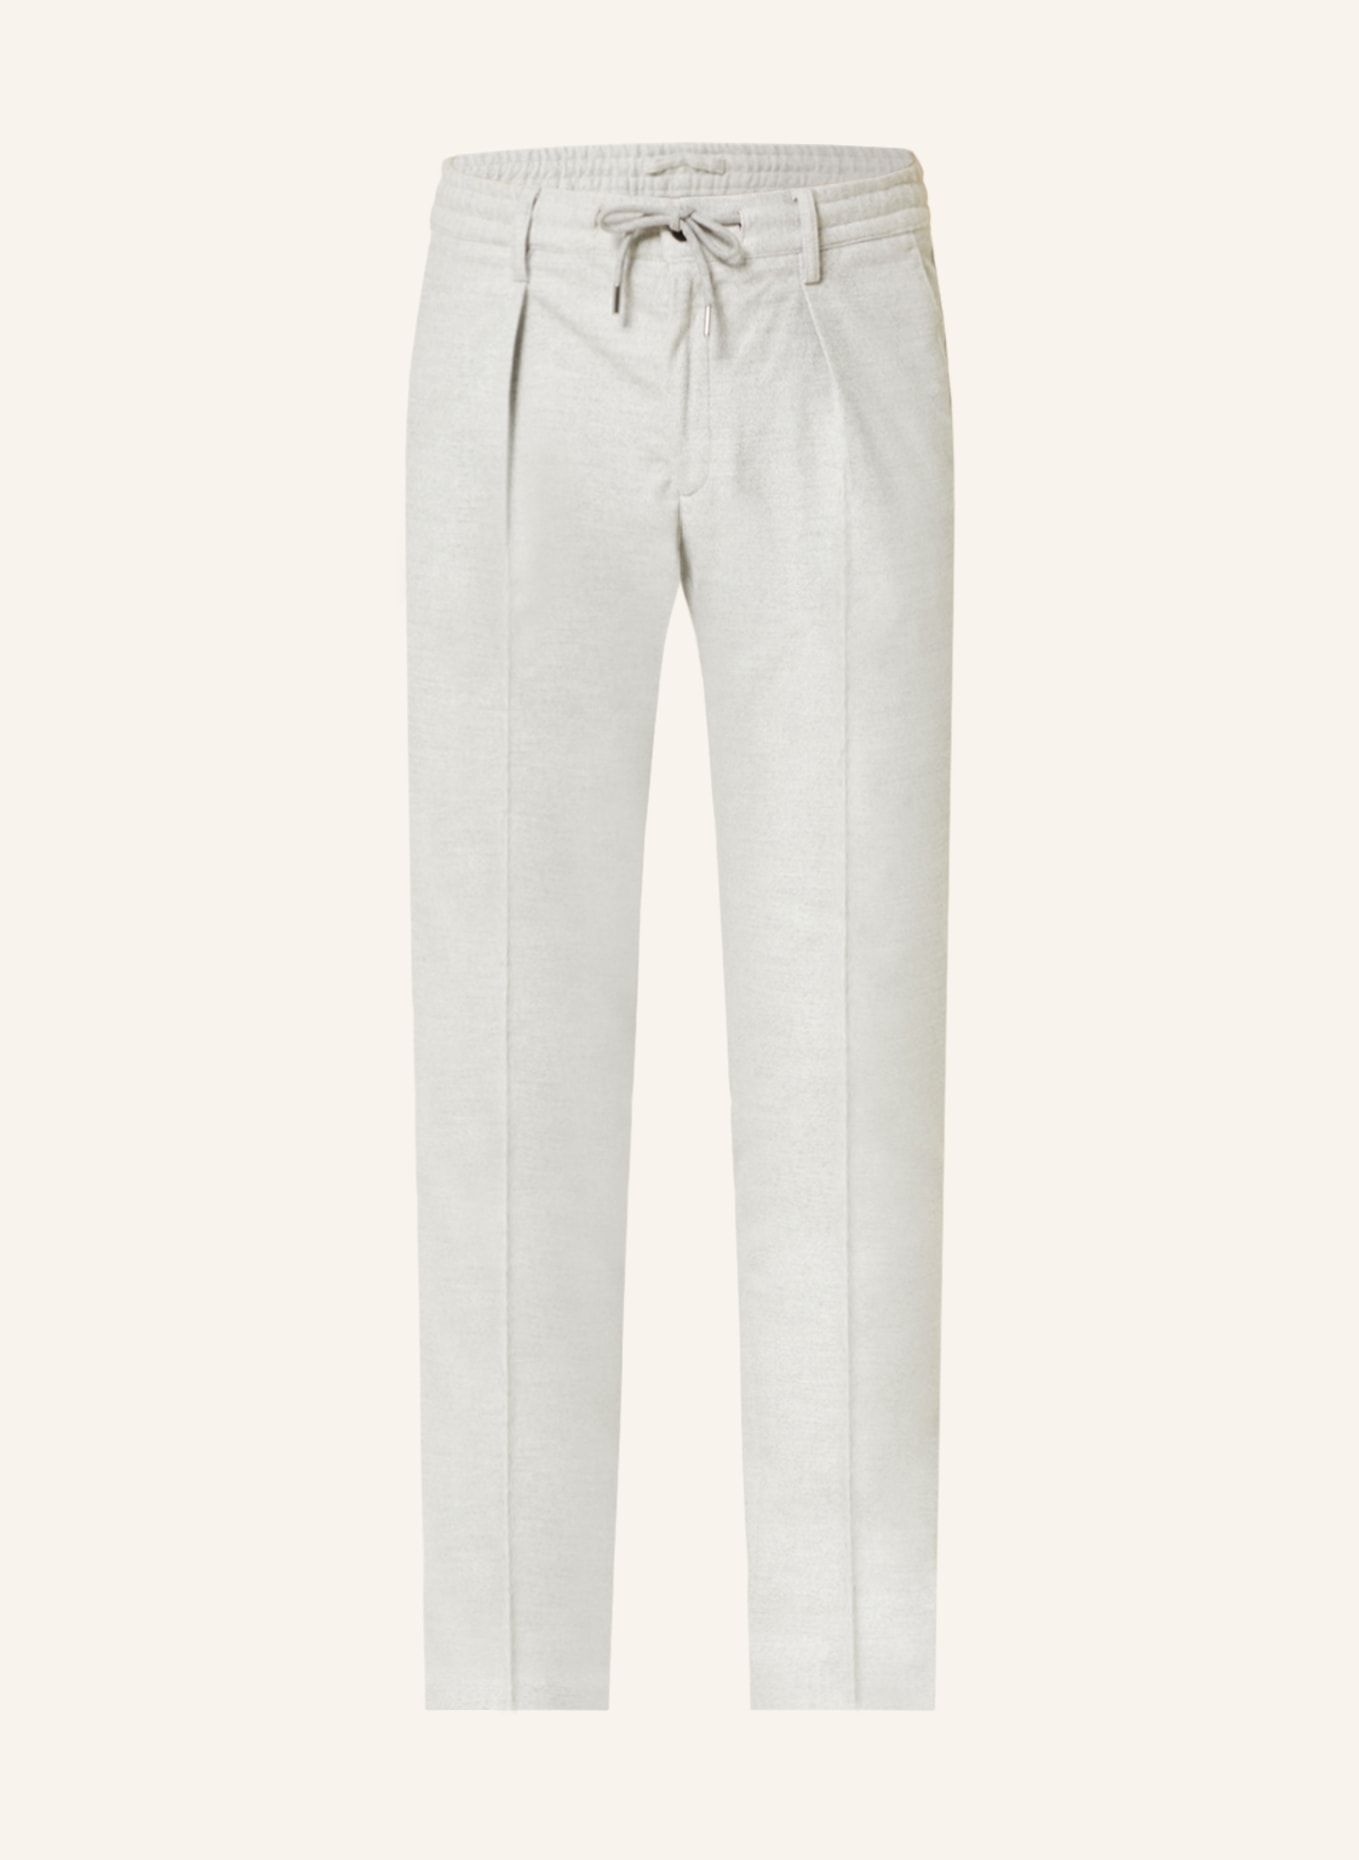 PROFUOMO Pants in jogger style, Color: LIGHT GRAY (Image 1)